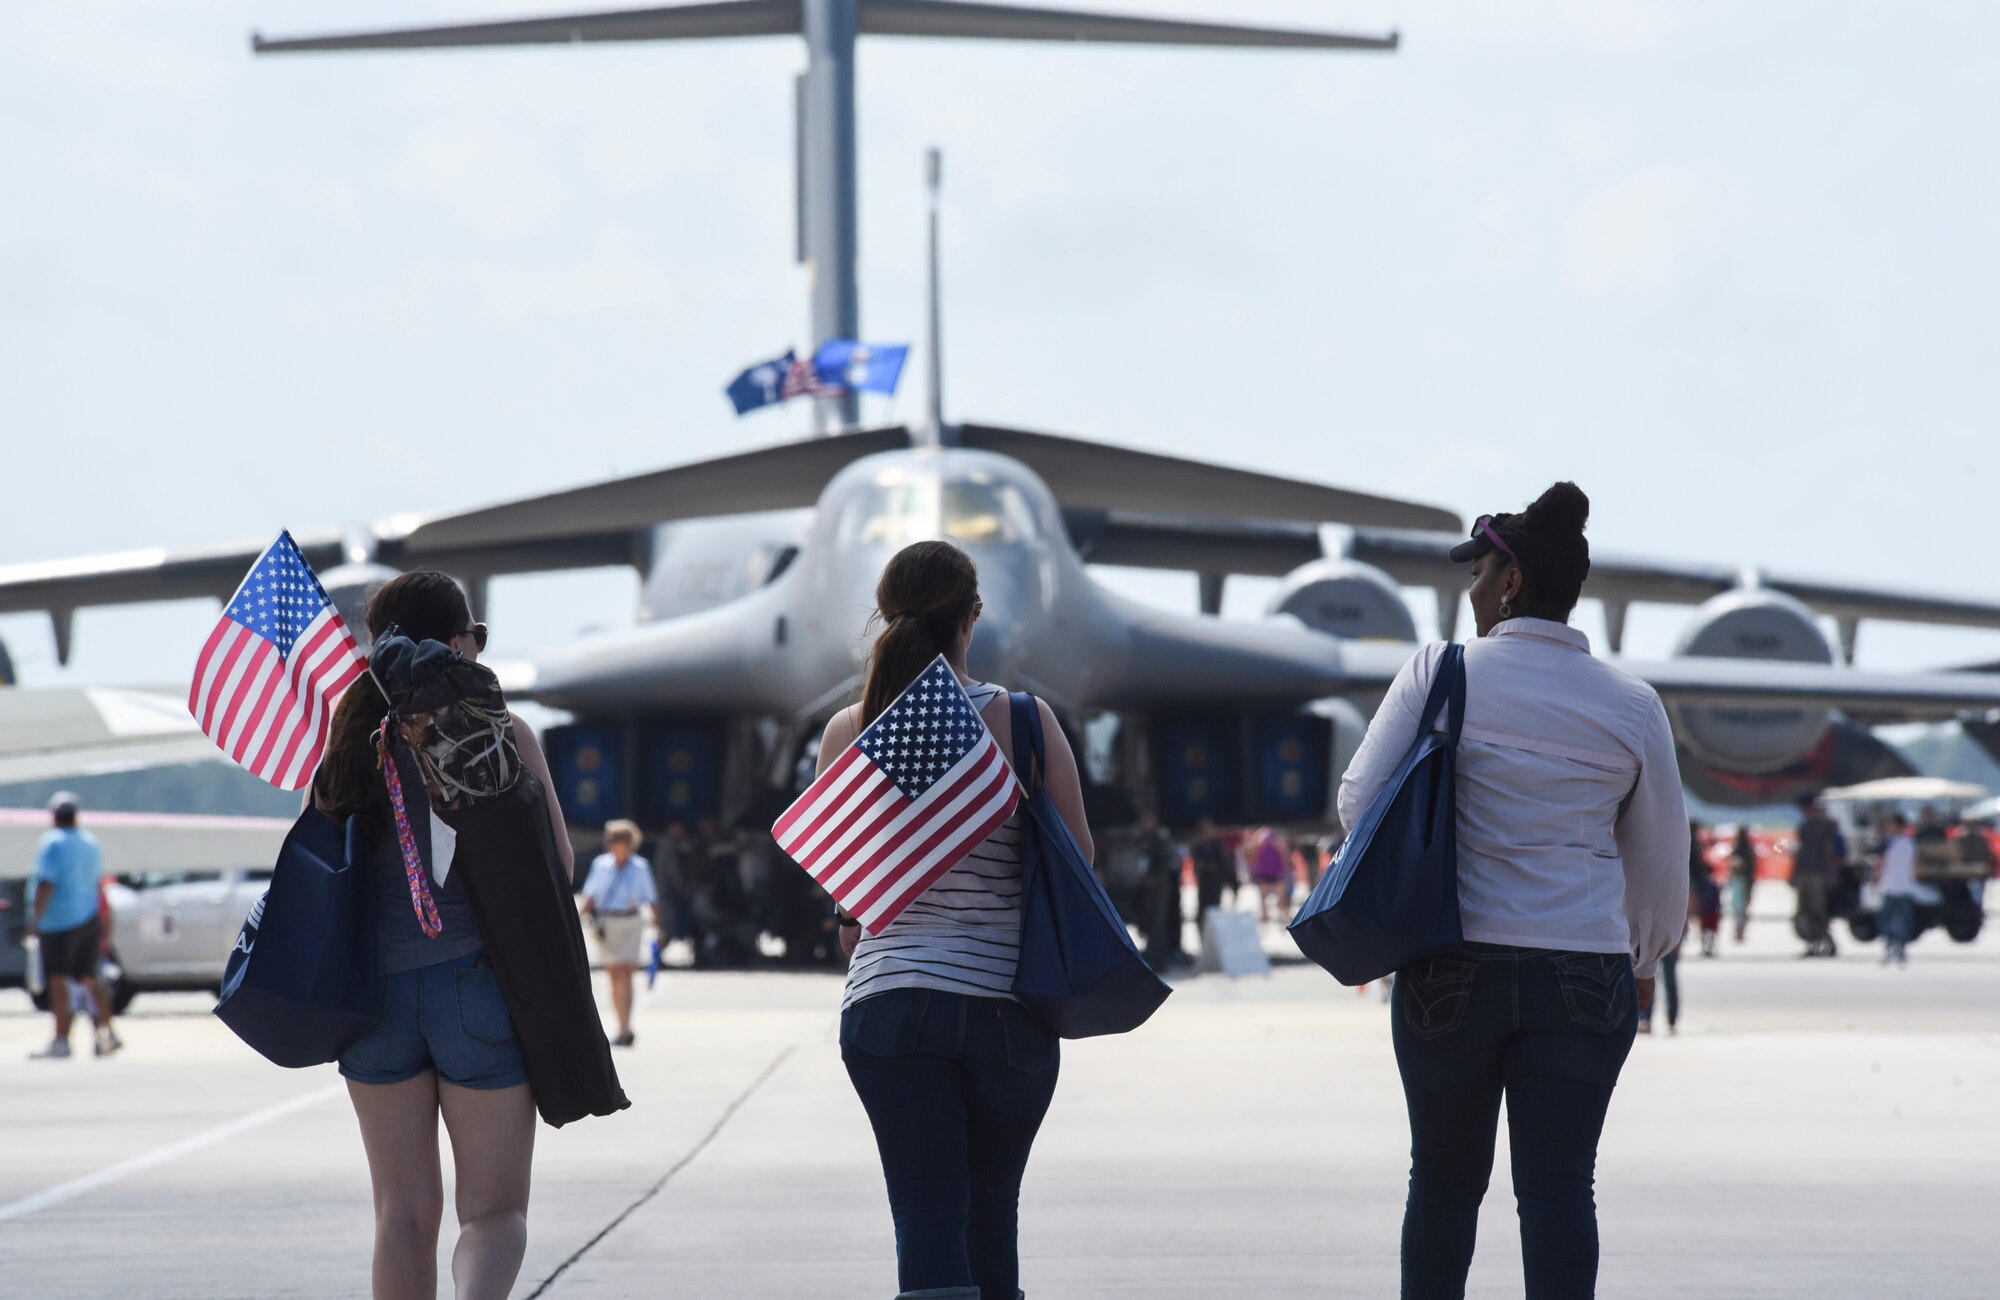 A group of patrons of the 2017 Gulf Coast Salute walk toward the B-1 Lancer static display at Tyndall Air Force Base, Fla., April 23, 2017. The B-1 was among many static display attractions during the air show paying homage to and informing visitors of aviation history. (U.S. Air Force photo by Senior Airman Solomon Cook/Released)
